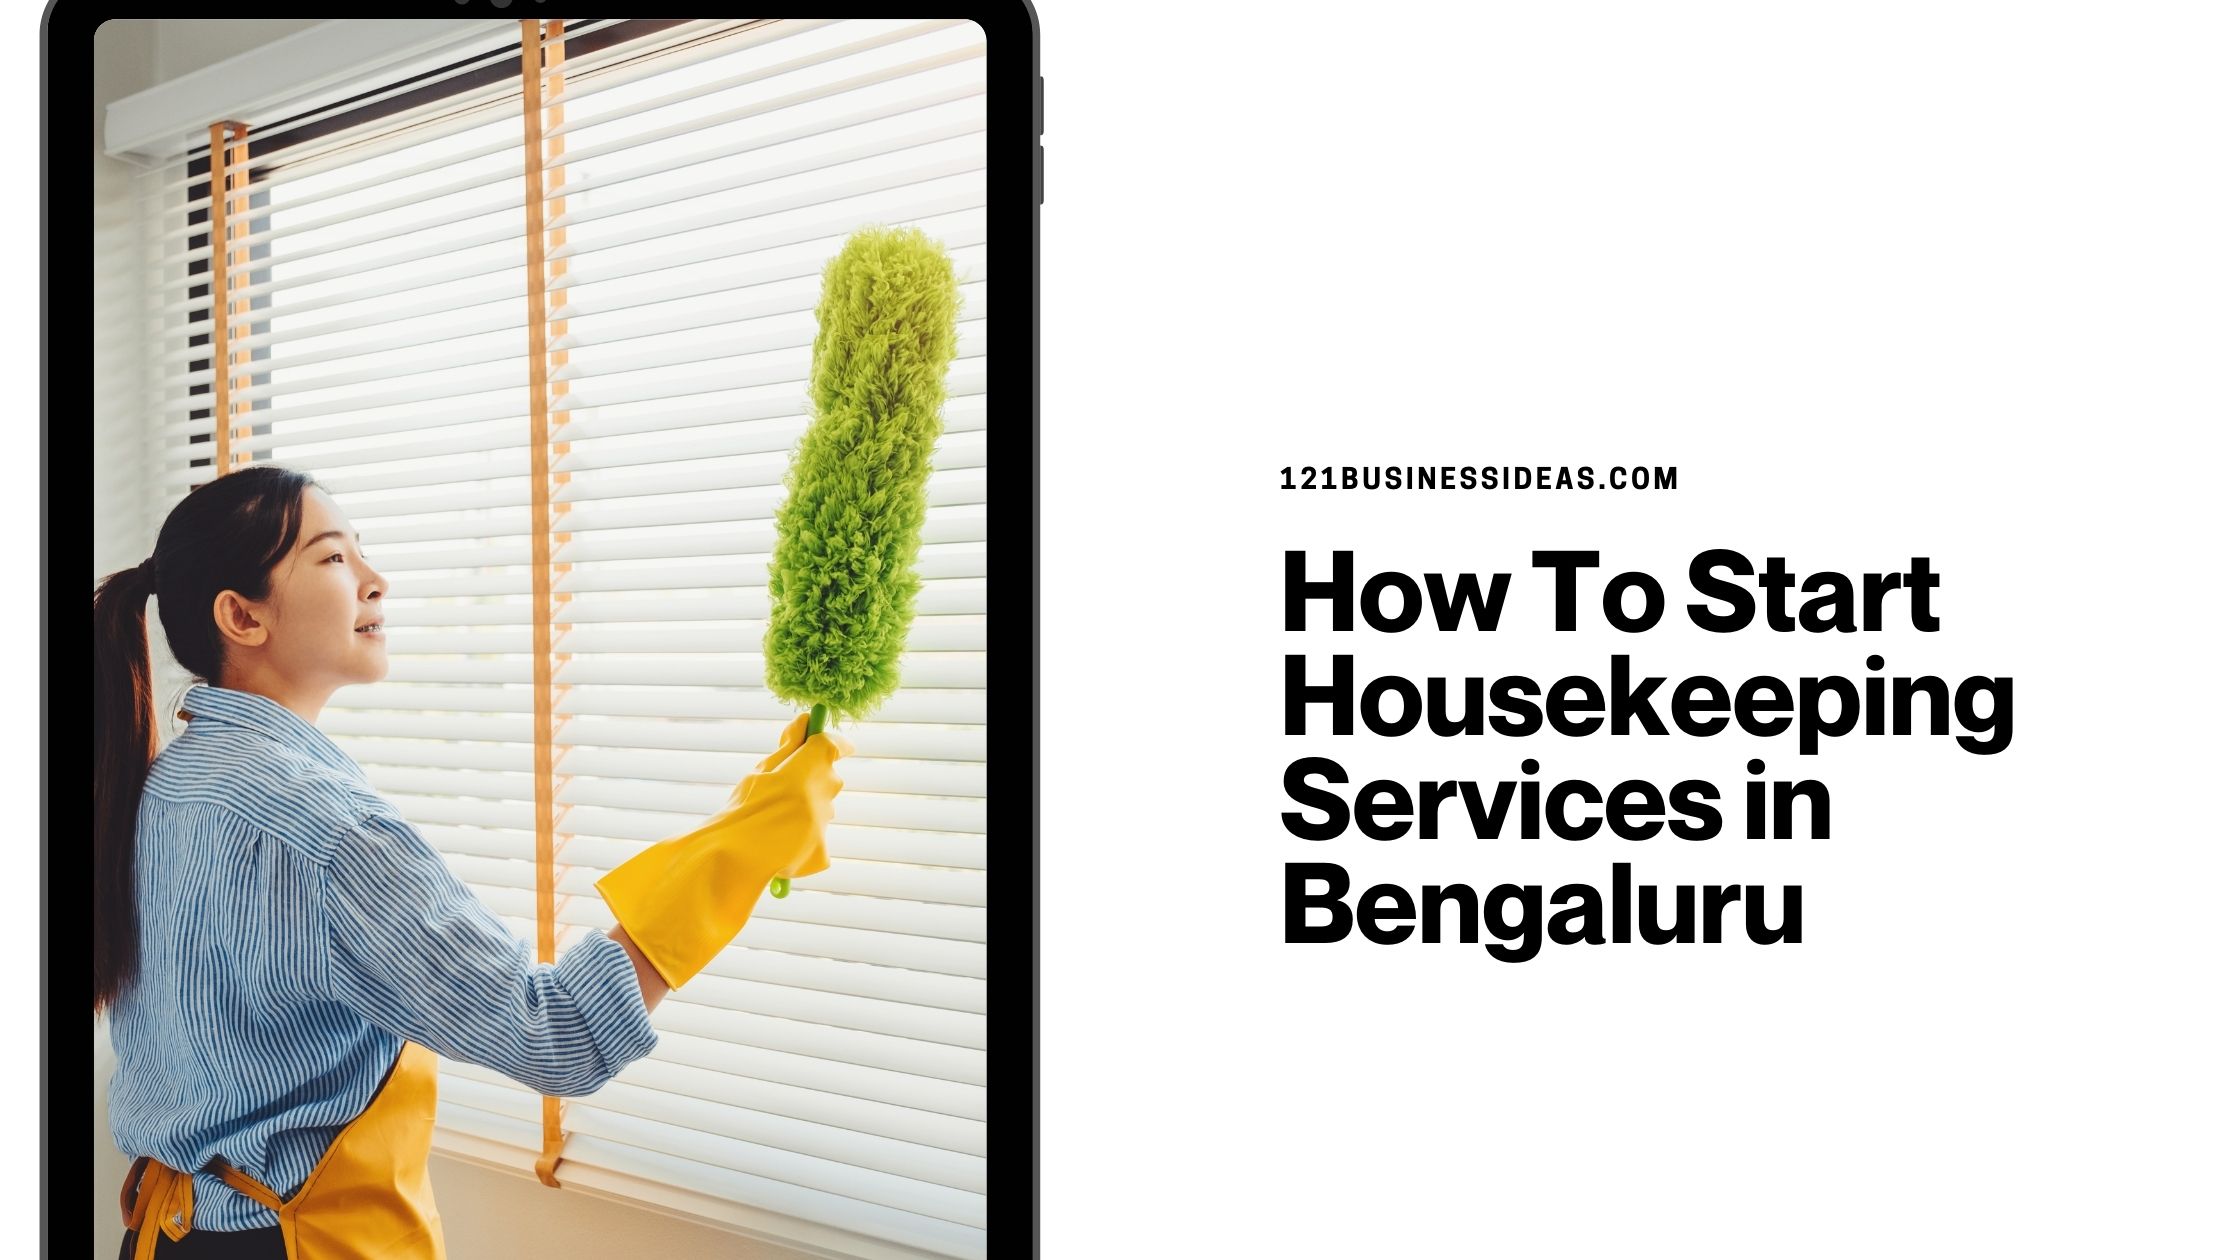 How To Start Housekeeping Services in Bengaluru